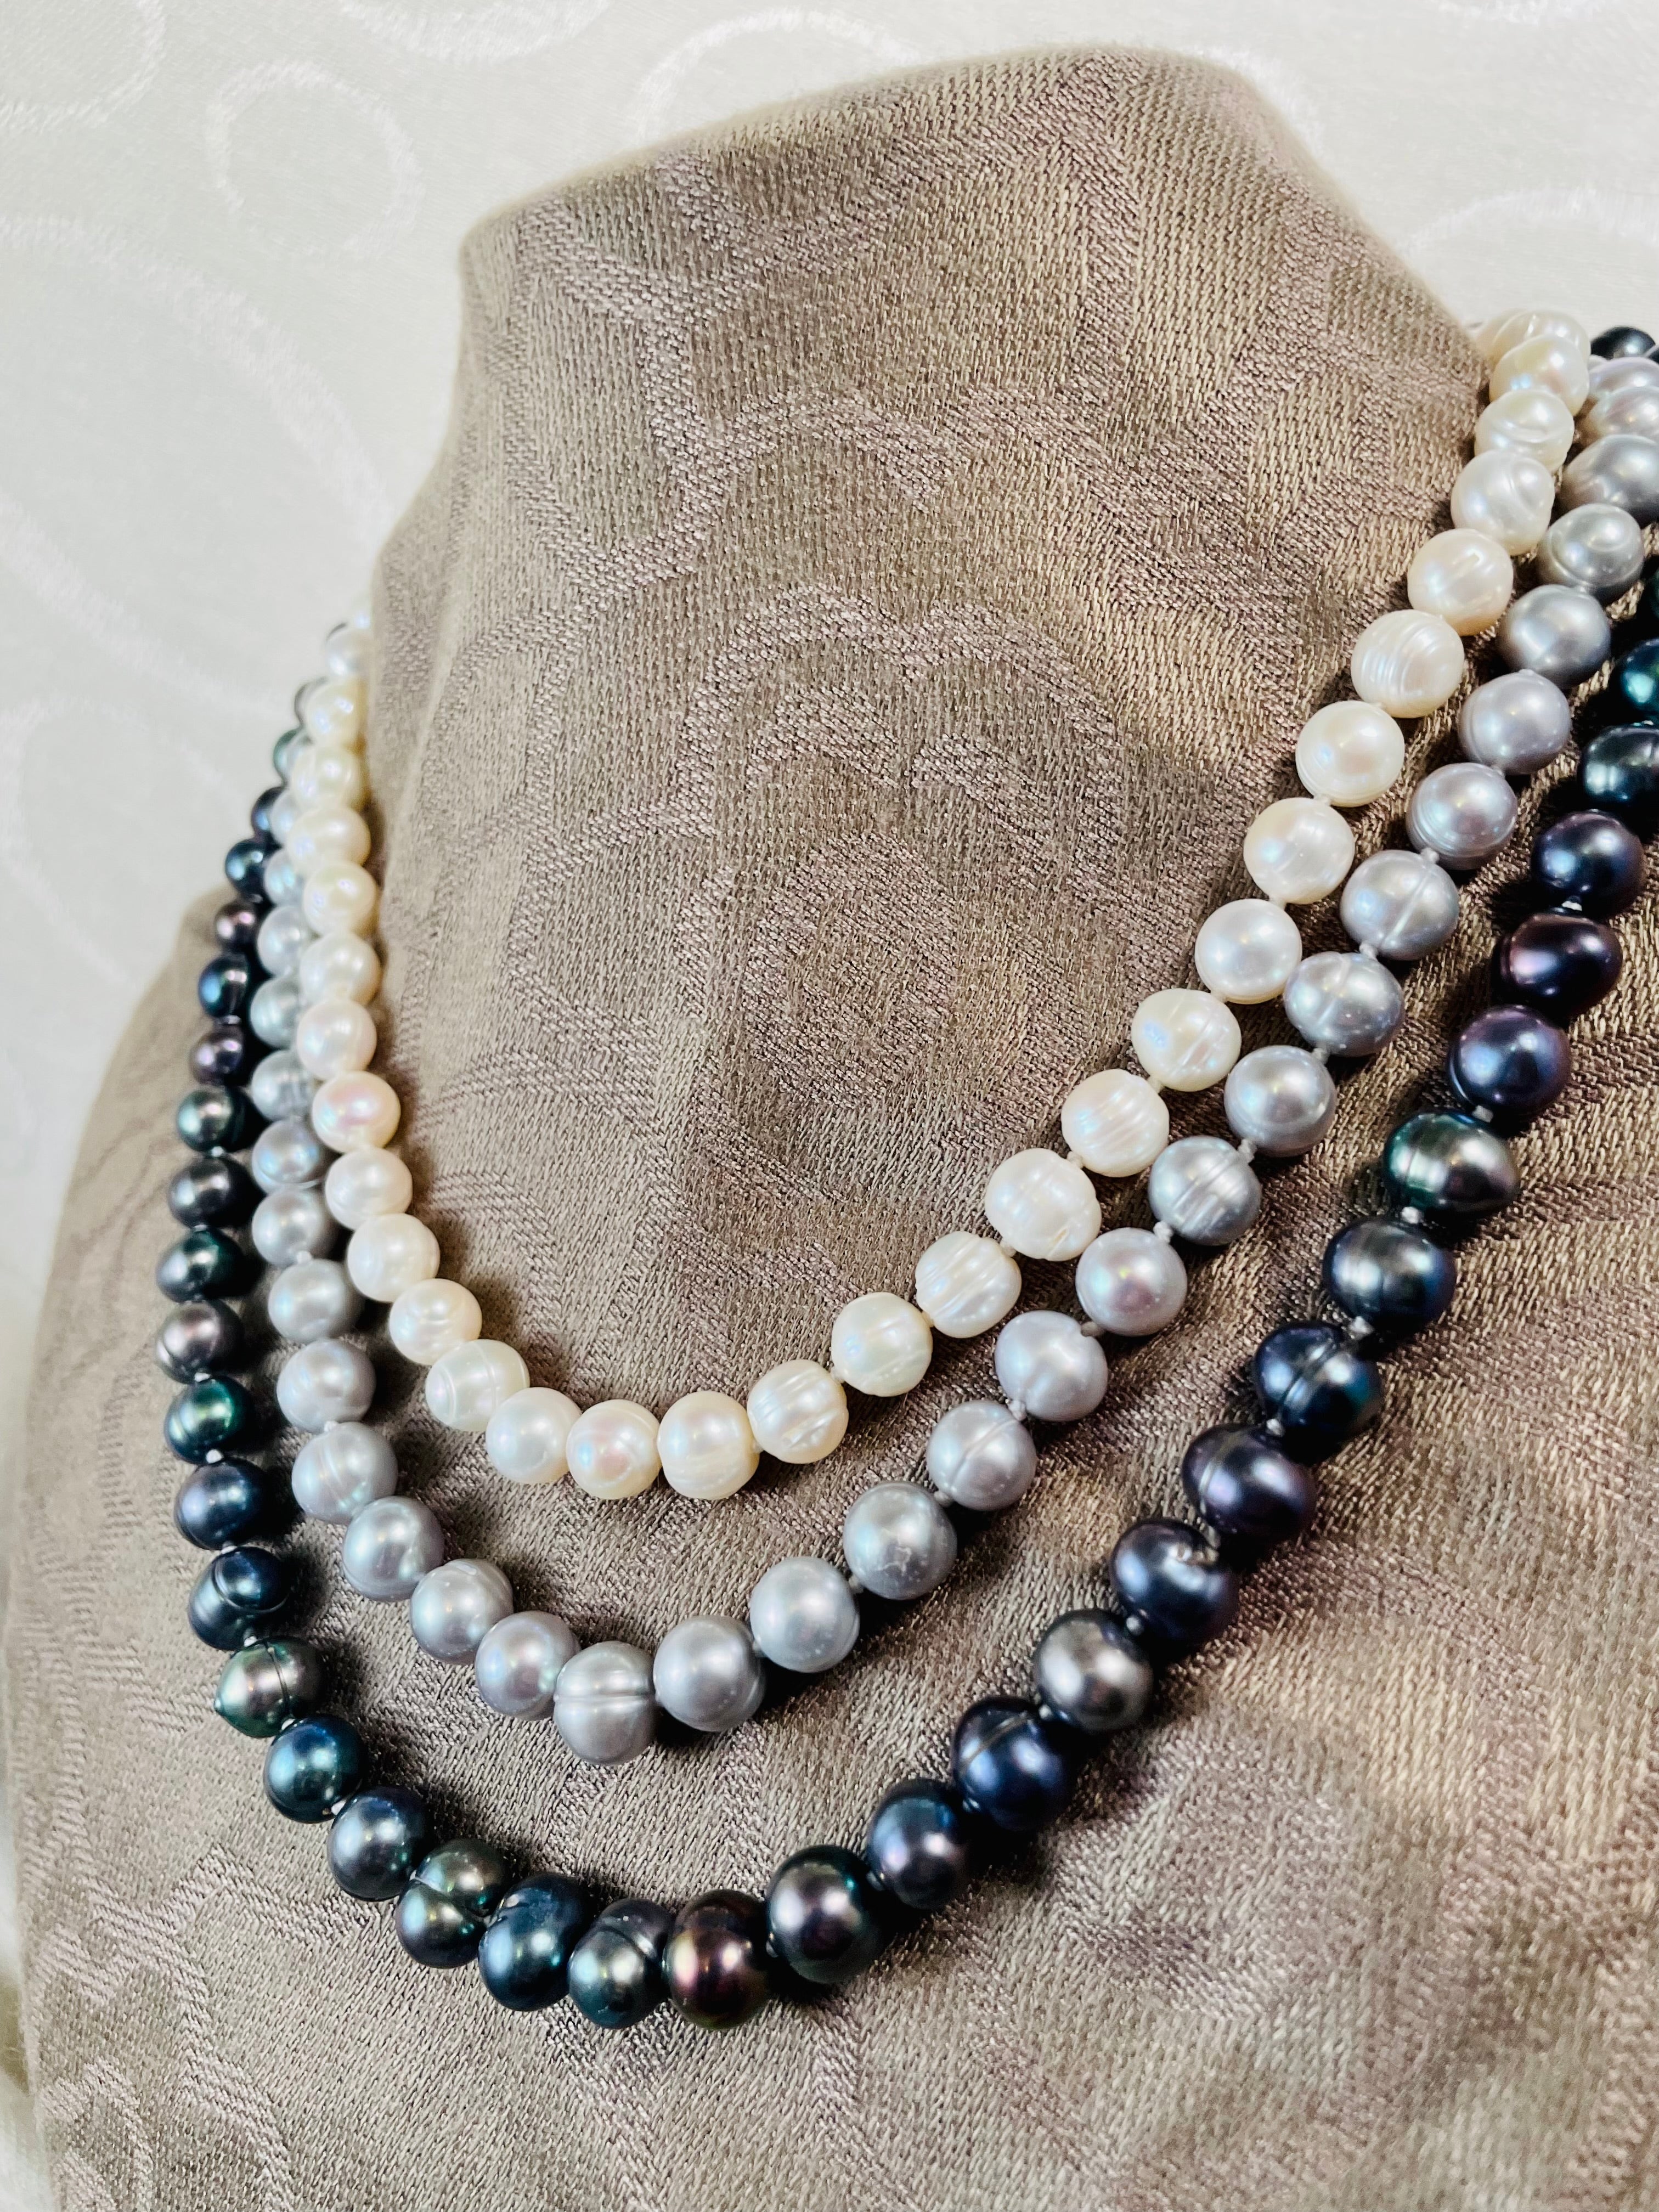 Triple strand ombré white, silver, and peacock pearl necklace